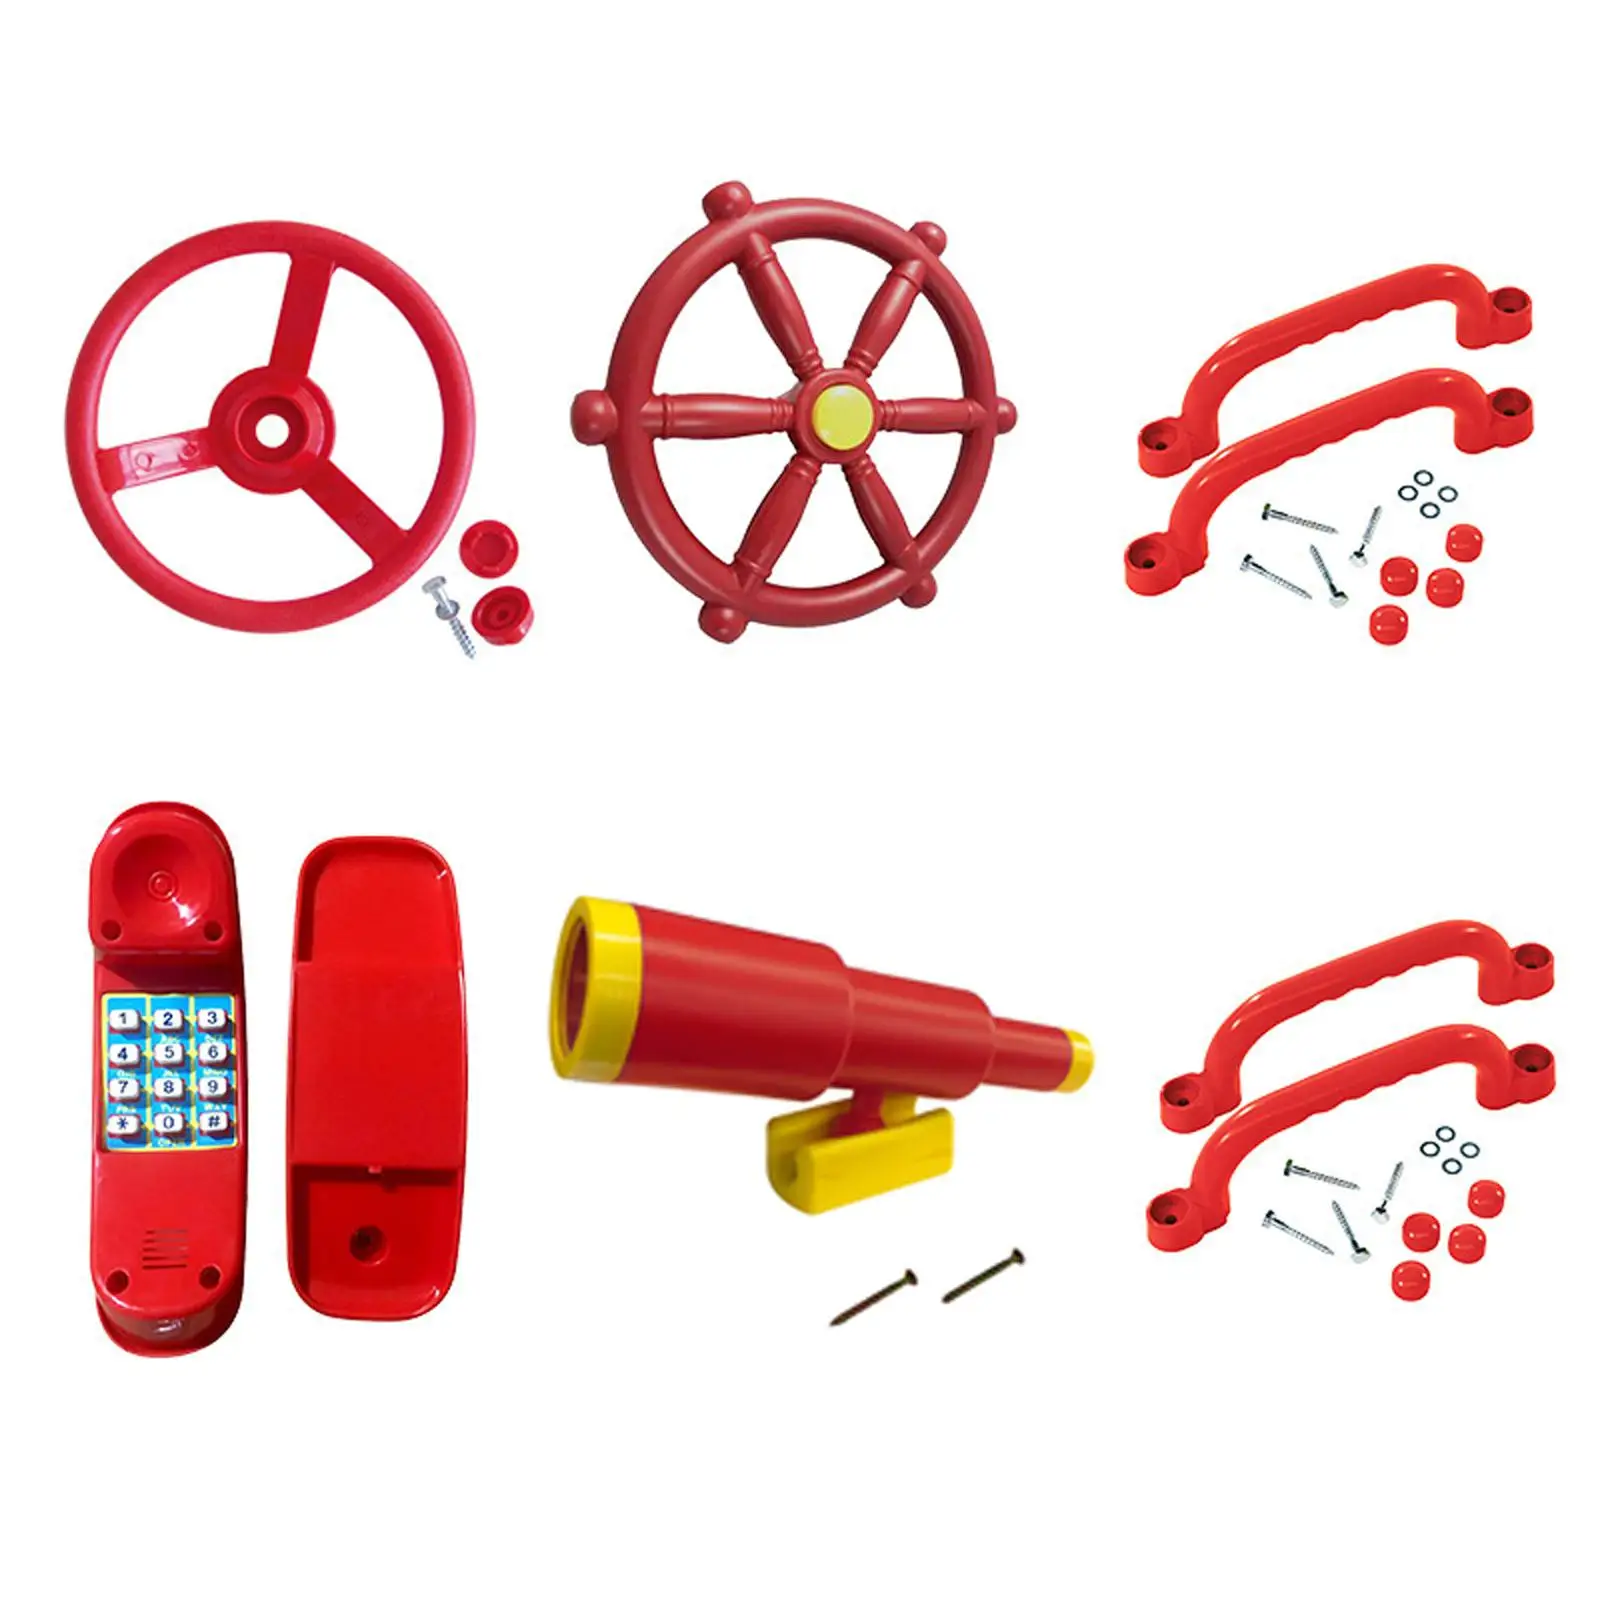 Playground Equipment Easy to Install Safety Handle Bars Pirate Ship Parts for Backyard Outdoor Playhouse Treehouse Gifts